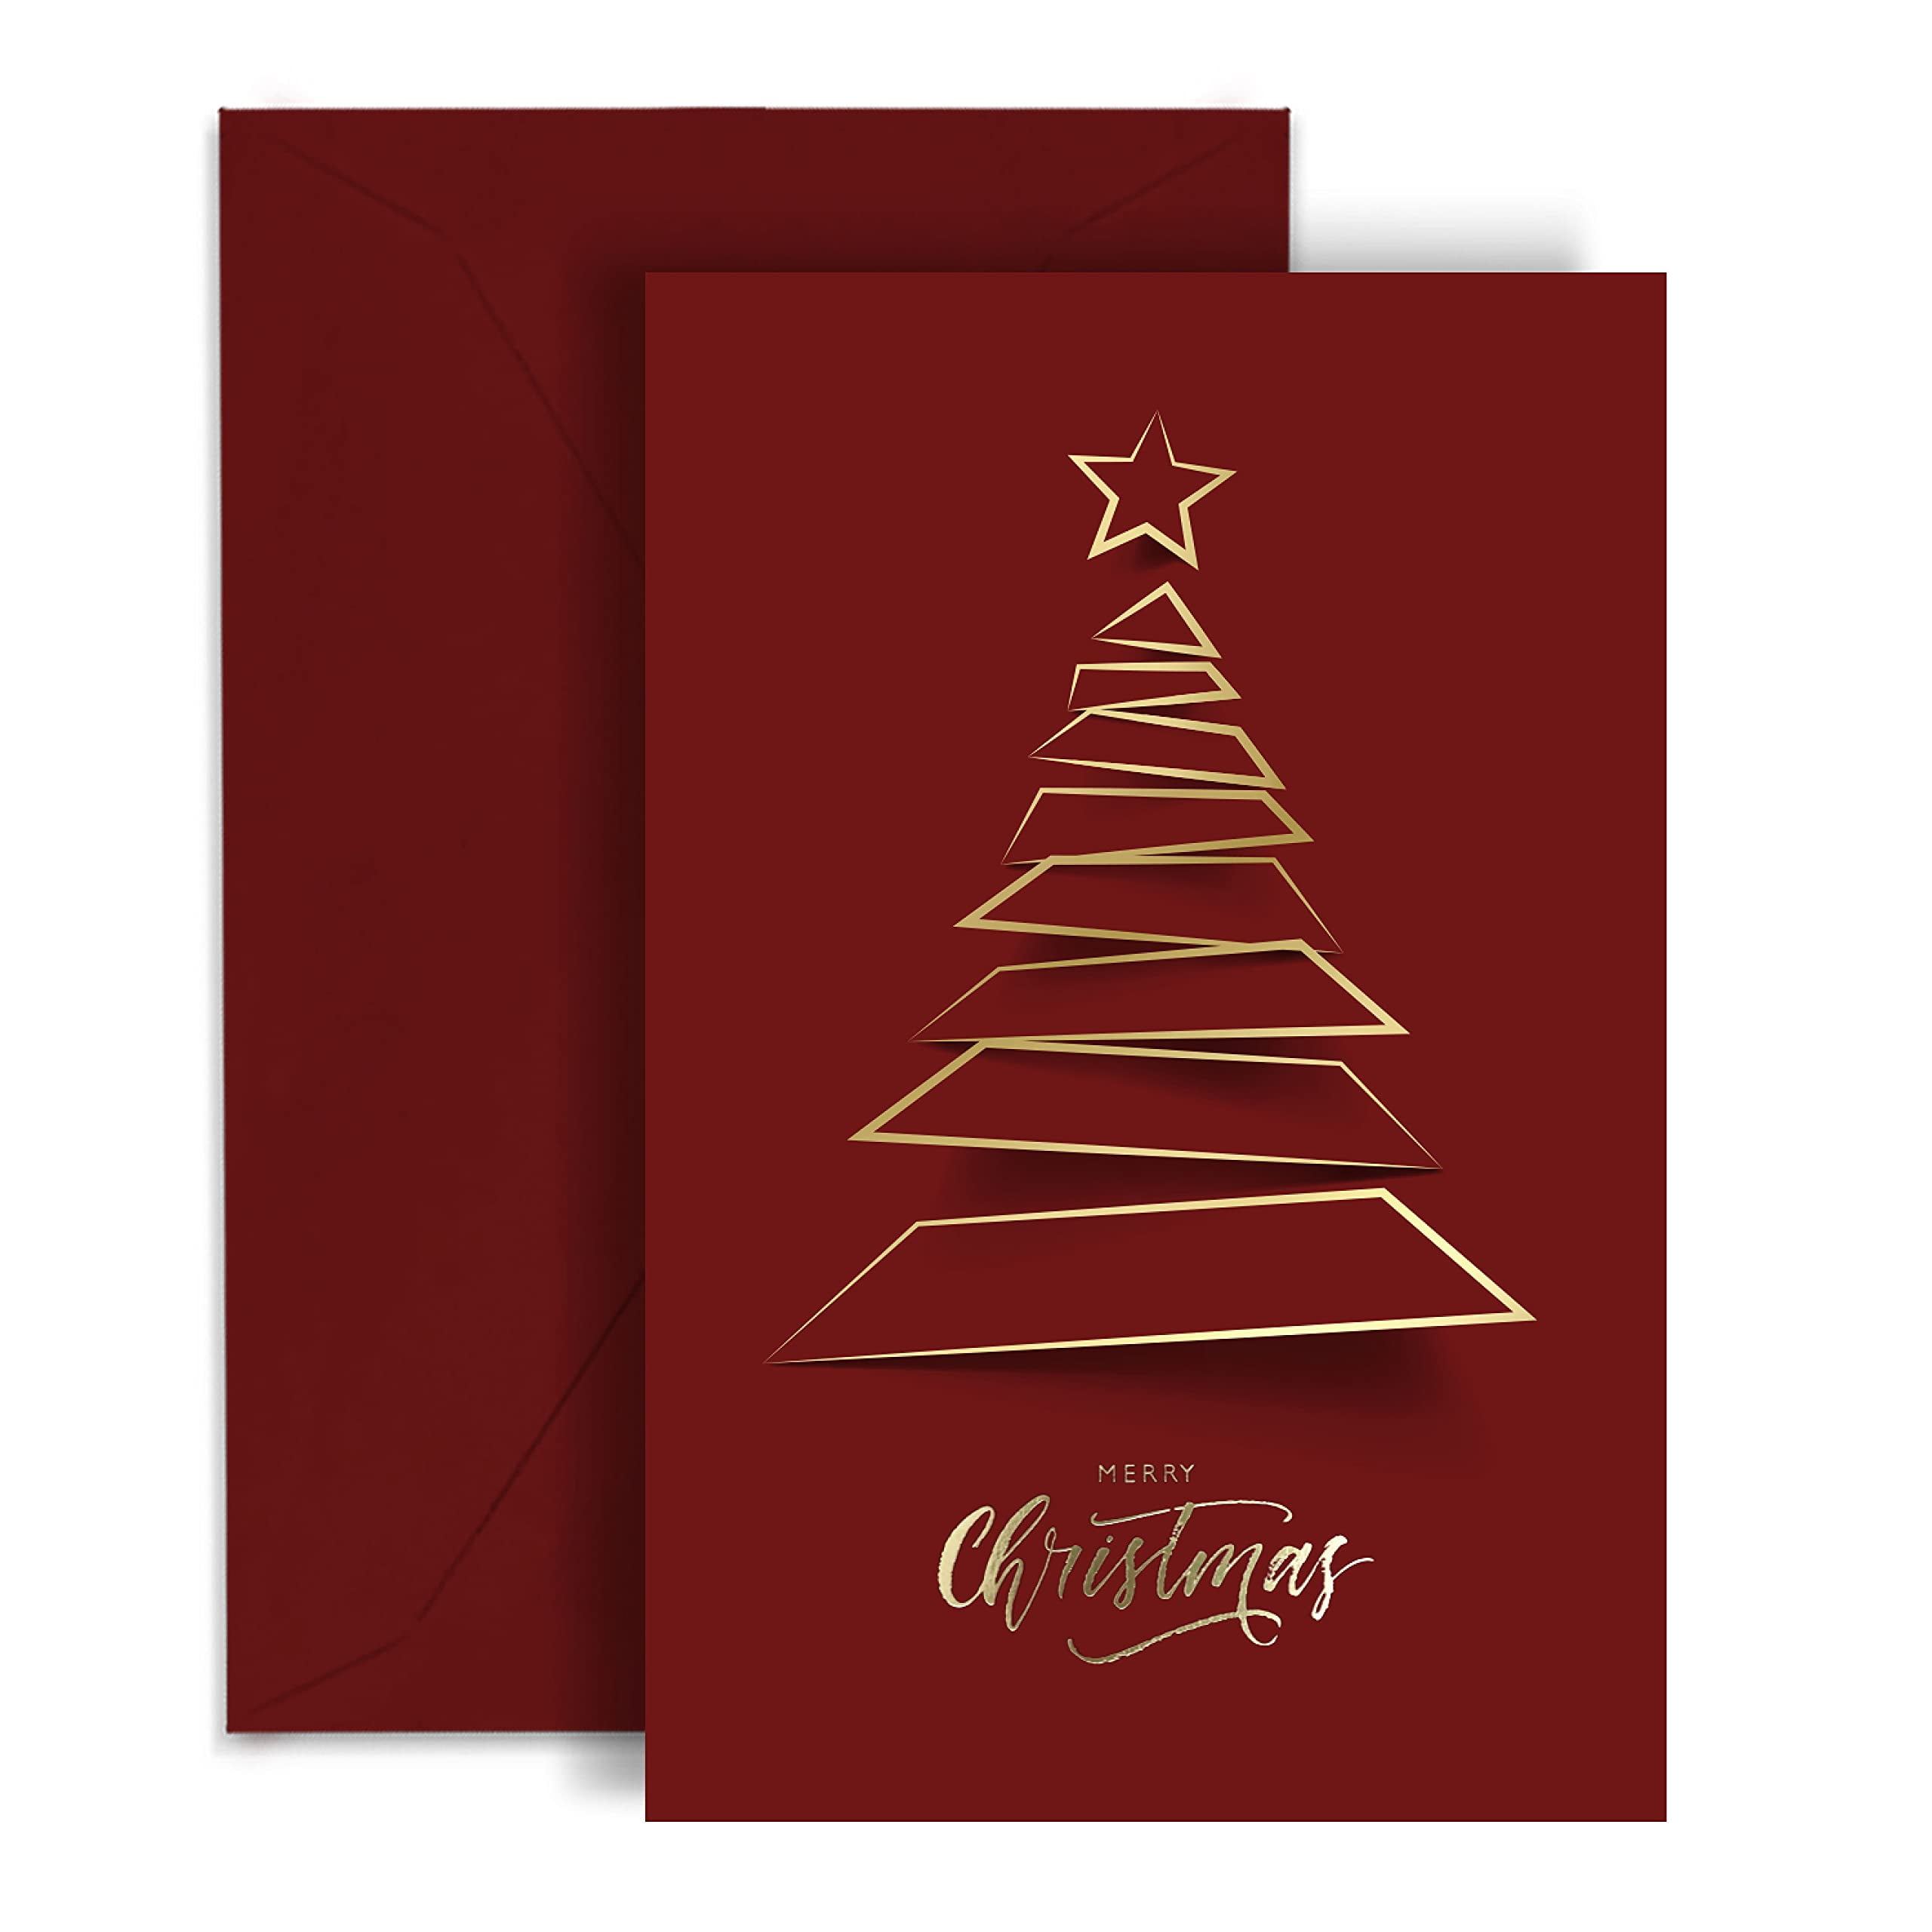 Holiday Envelope Sealing Stickers Personalized Envelope Stickers for  Christmas Cards Variety of Designs Bundle and Save 